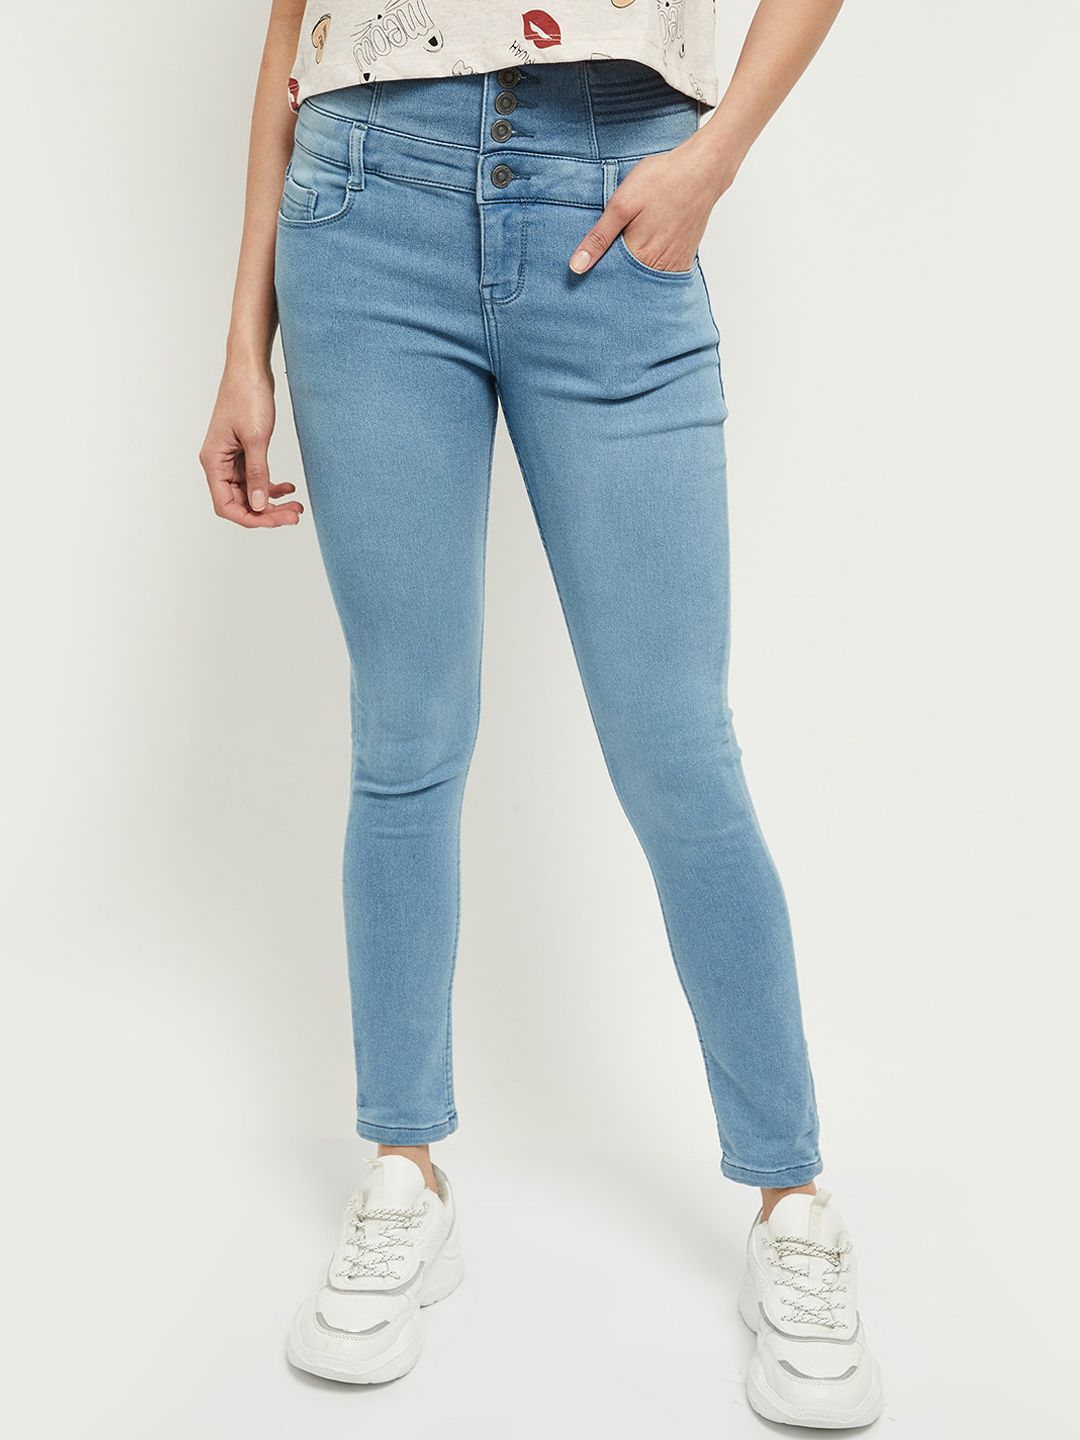 max Women Blue Slim Fit Stretchable Jeans Price in India